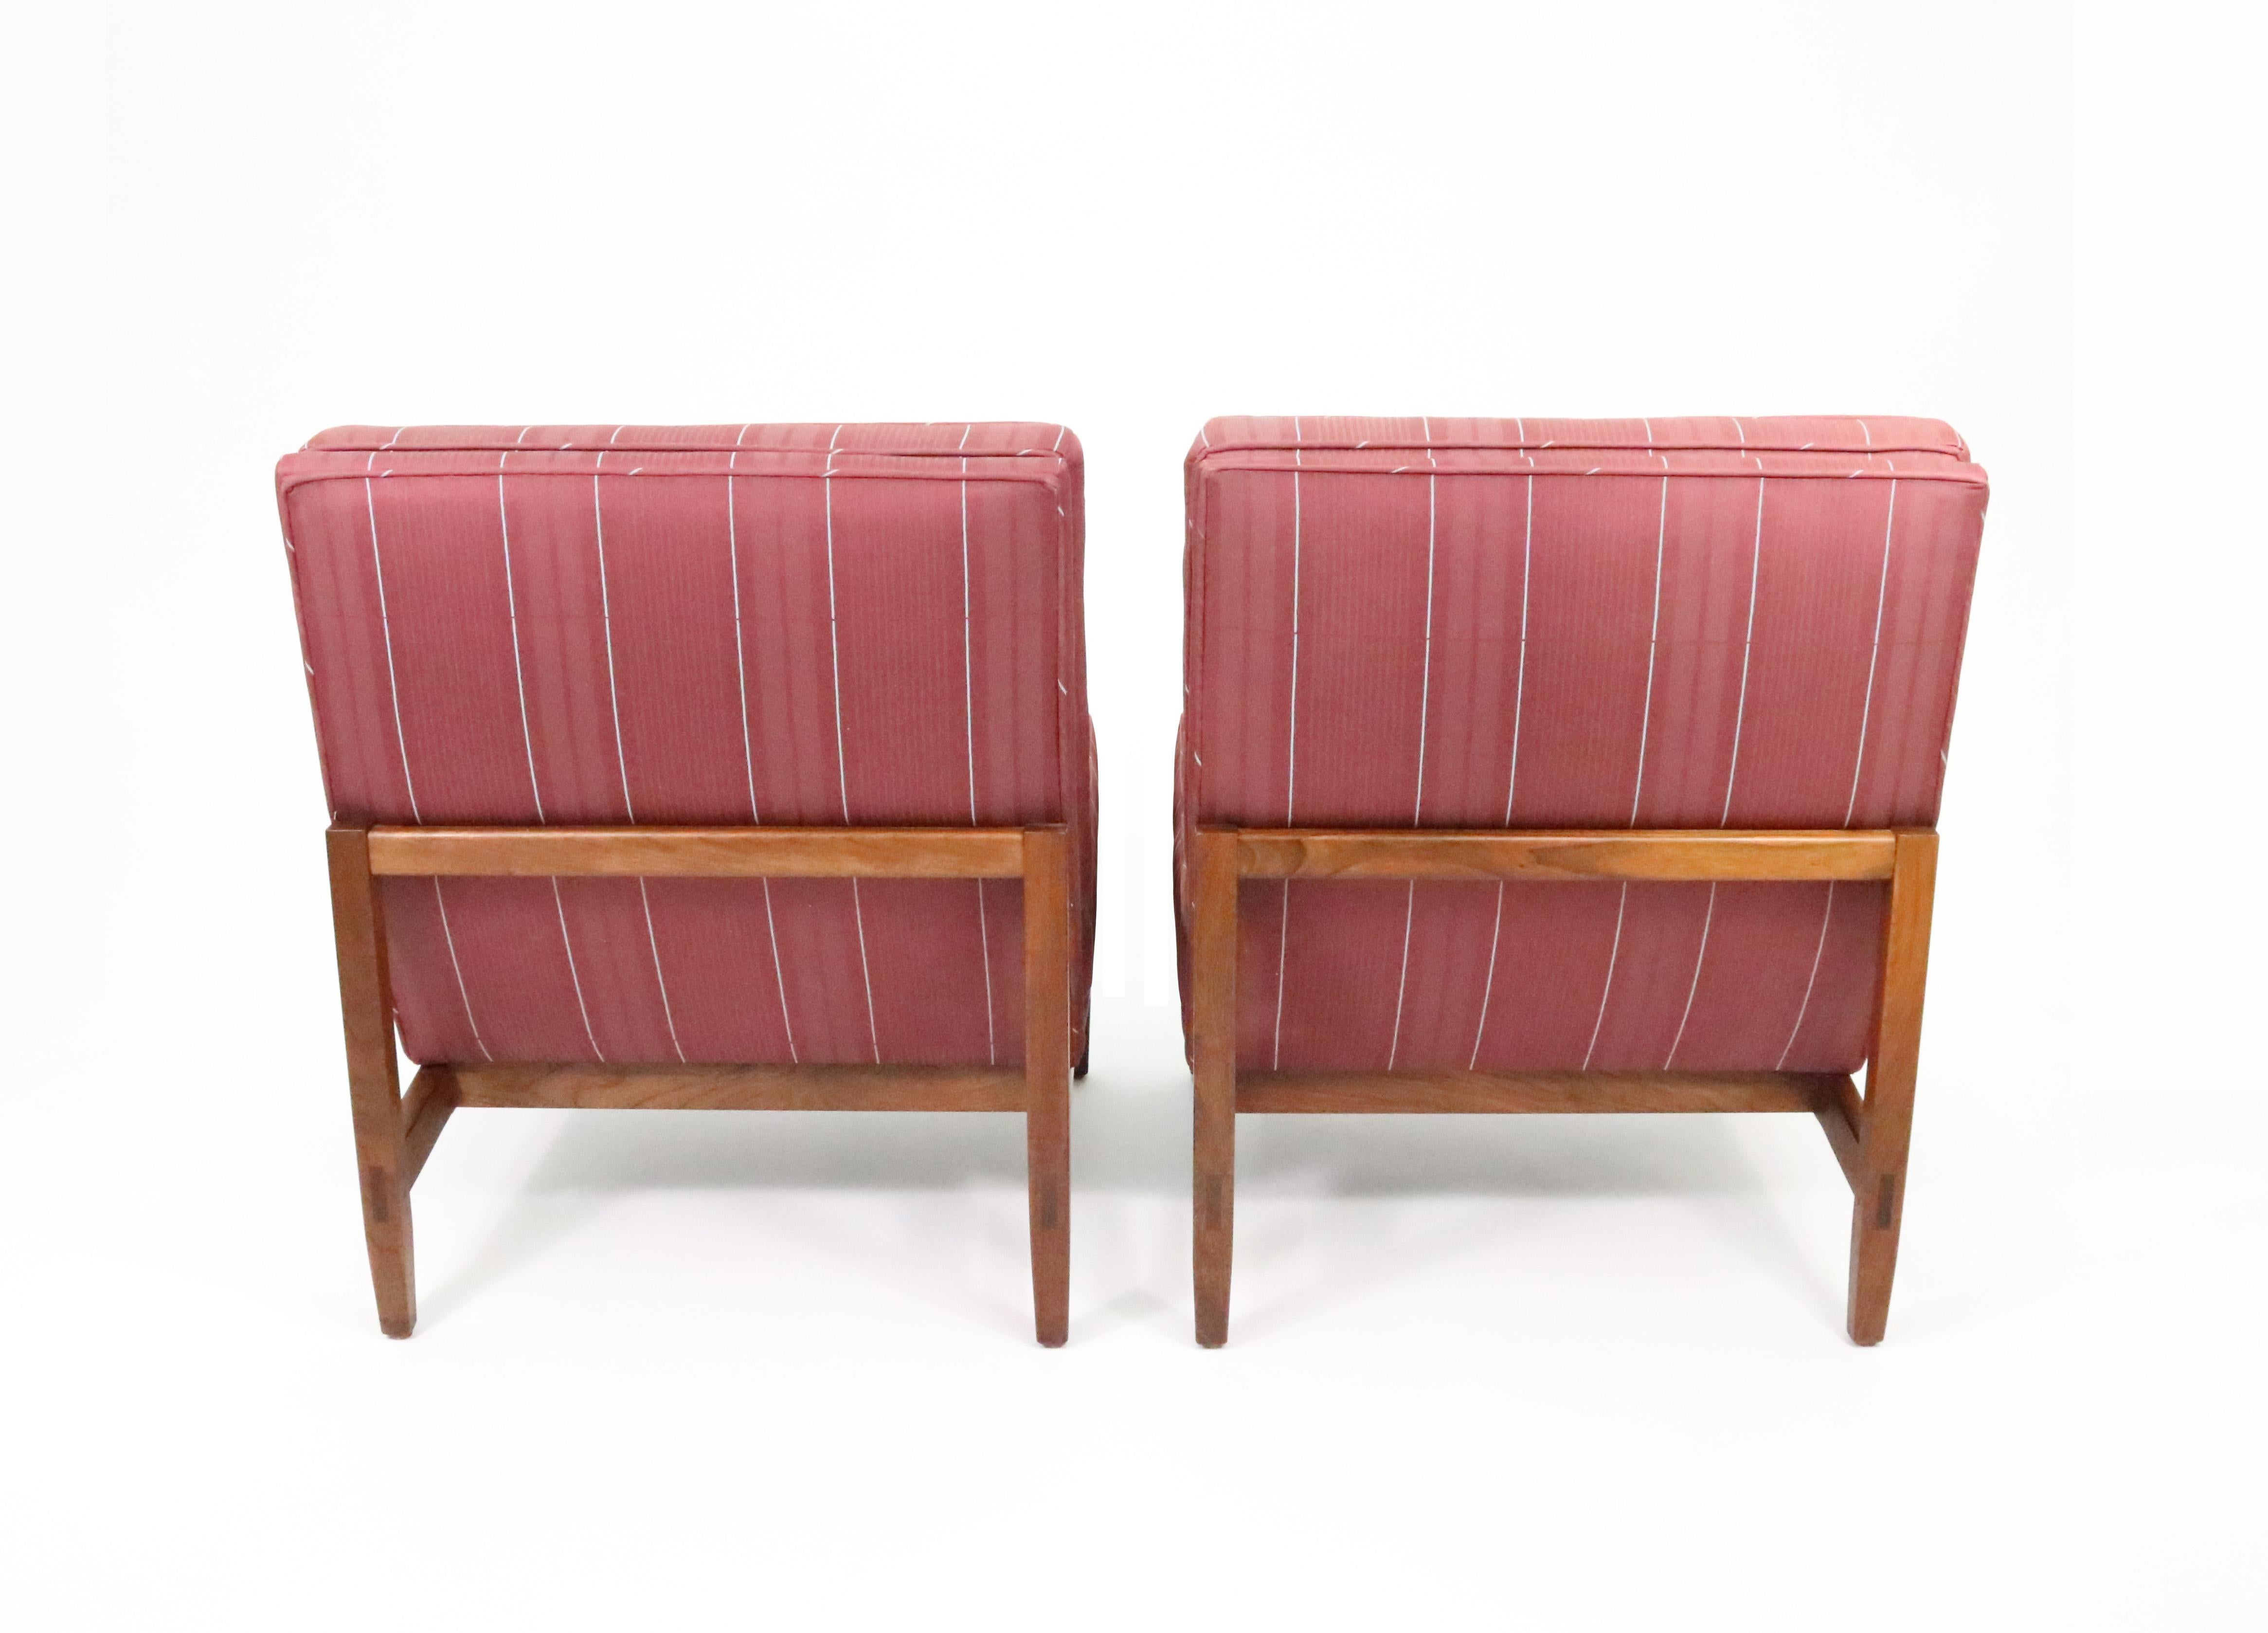 Mid-20th Century Florence Knoll Slipper Chairs in Walnut, Model 51w, 1950s